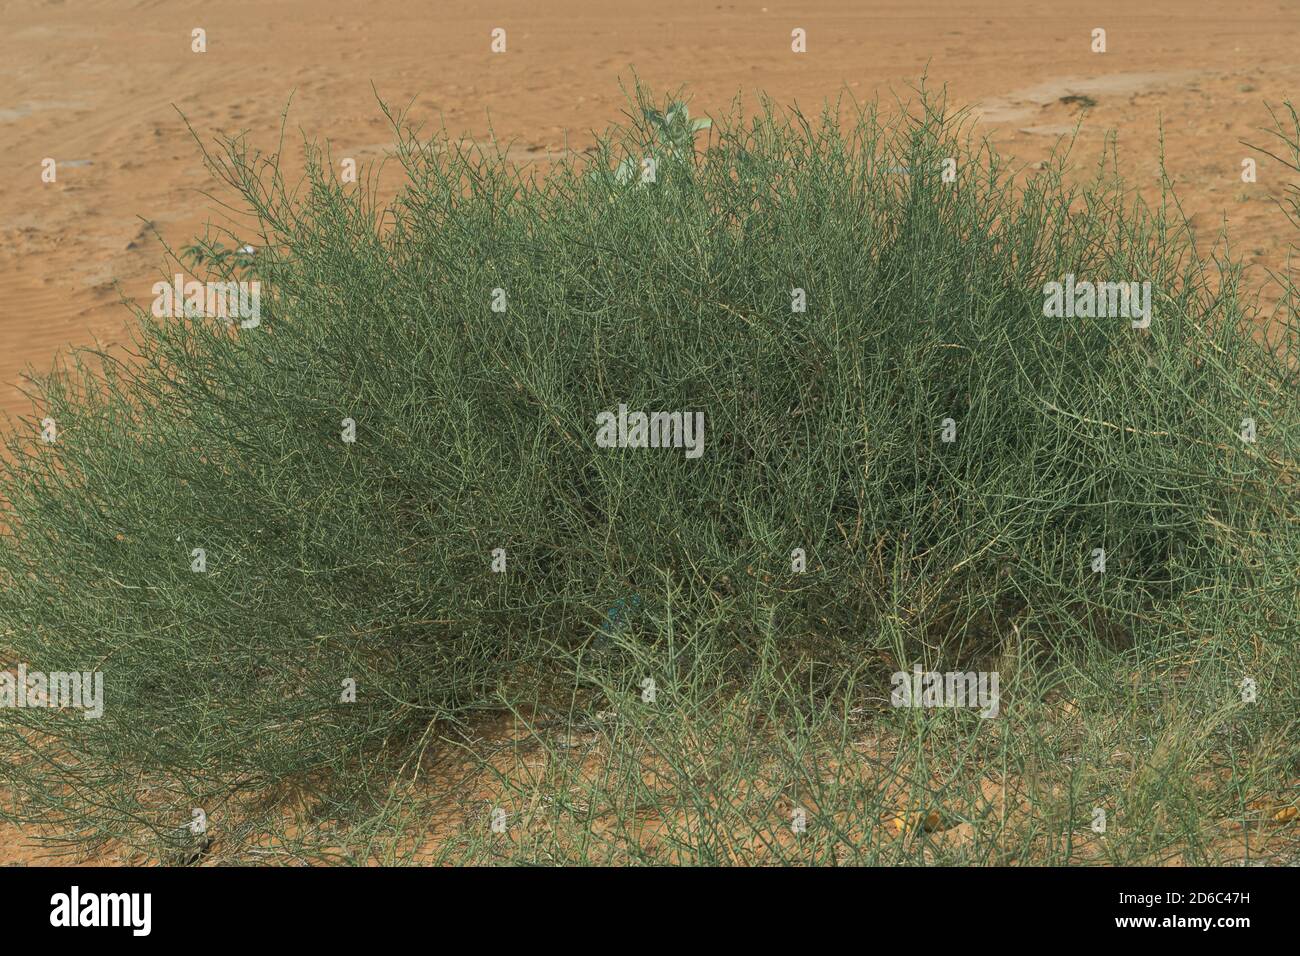 Green resilient desert grass plants with small yellow flowers sits among the patterned and textured orange sands in the United Arab Emirates. Stock Photo